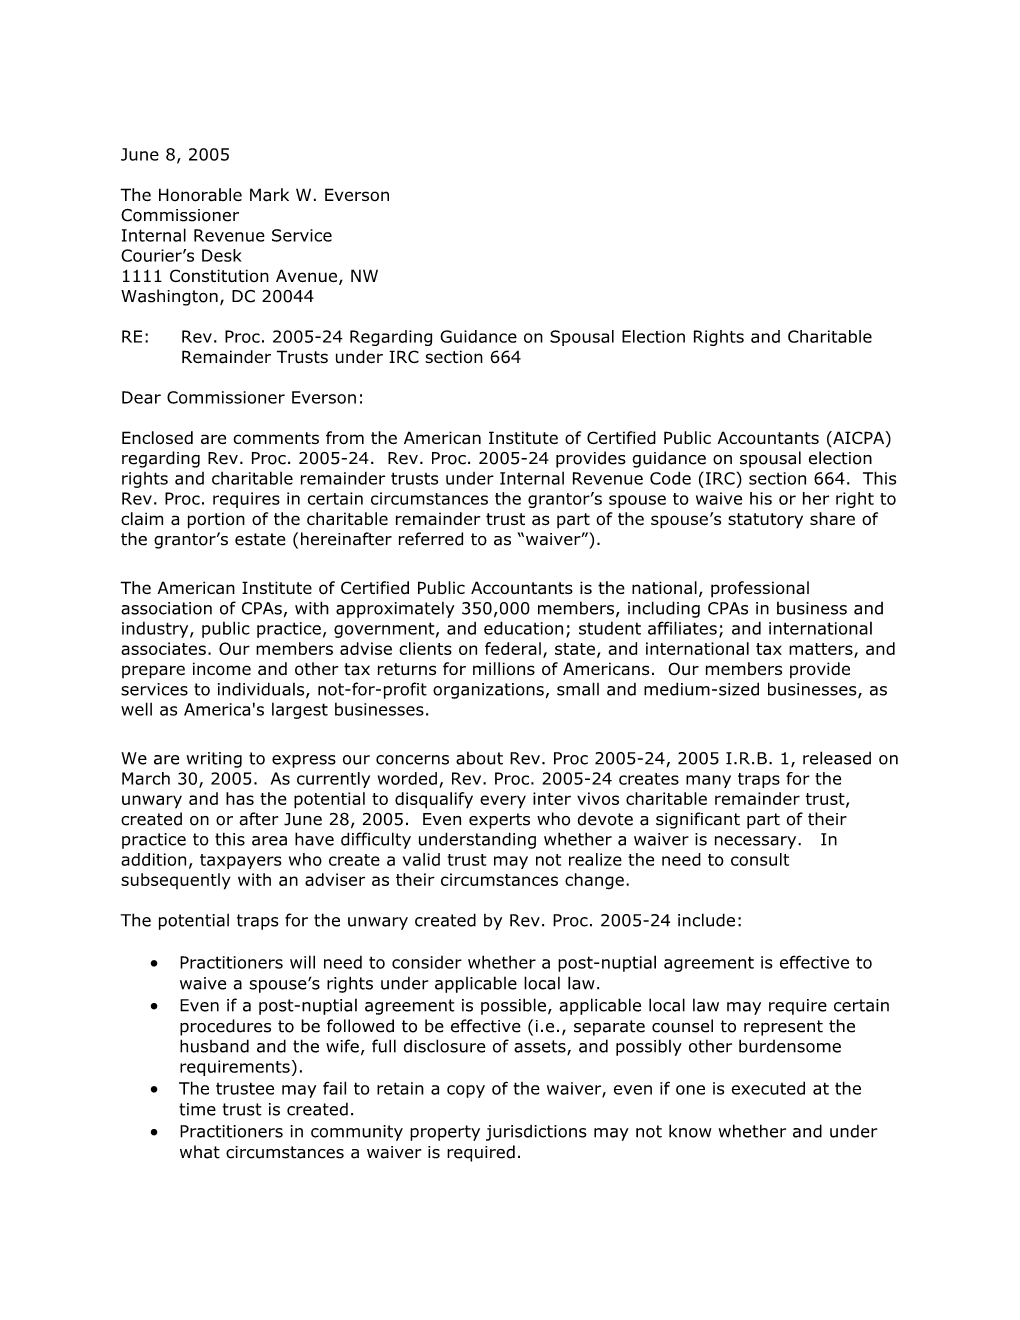 AICPA Letter to IRS on Rev. Proc. 2005-24 Regarding Spousal Election Rights and Crts